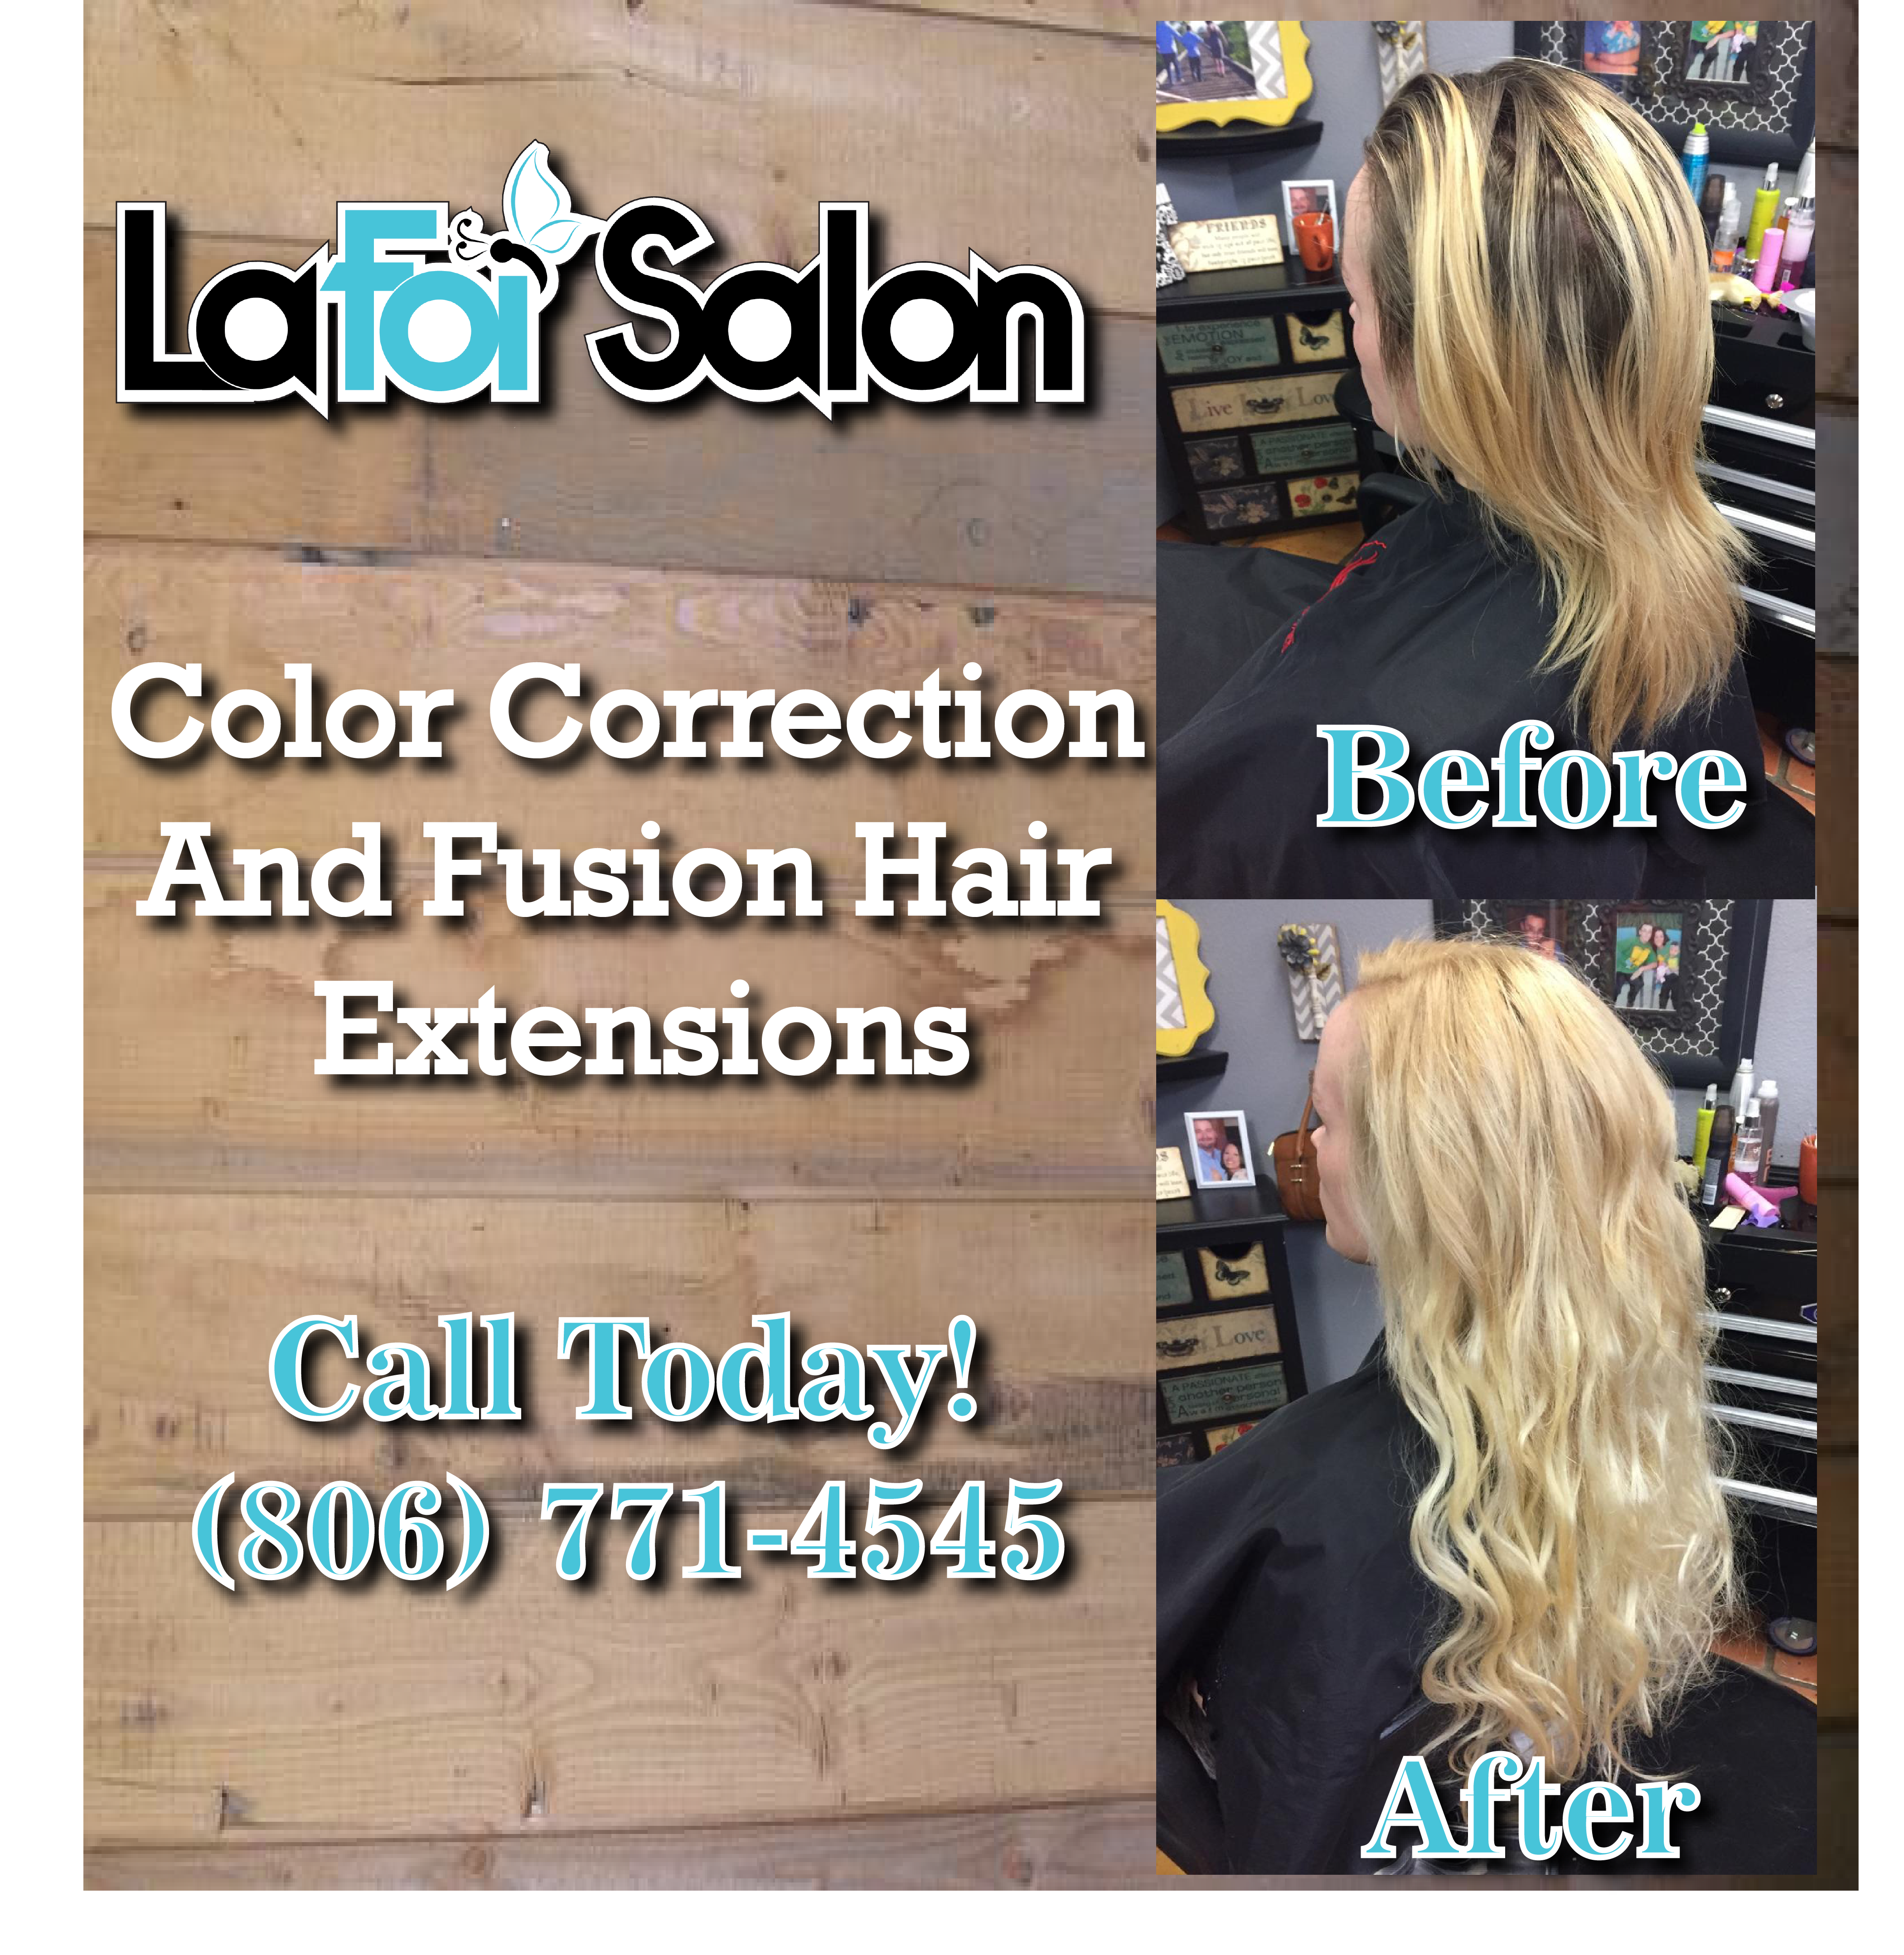 Do You Need A Color Corrected? Do You Want Longer Hair? We Can Do Both!! Call Today!! (806) 771-4545 www.lafoisalon.com  hairsalonslubbock  hairextensionslubbock  correctivecolorlubbock https://goo.gl/L2bhmp